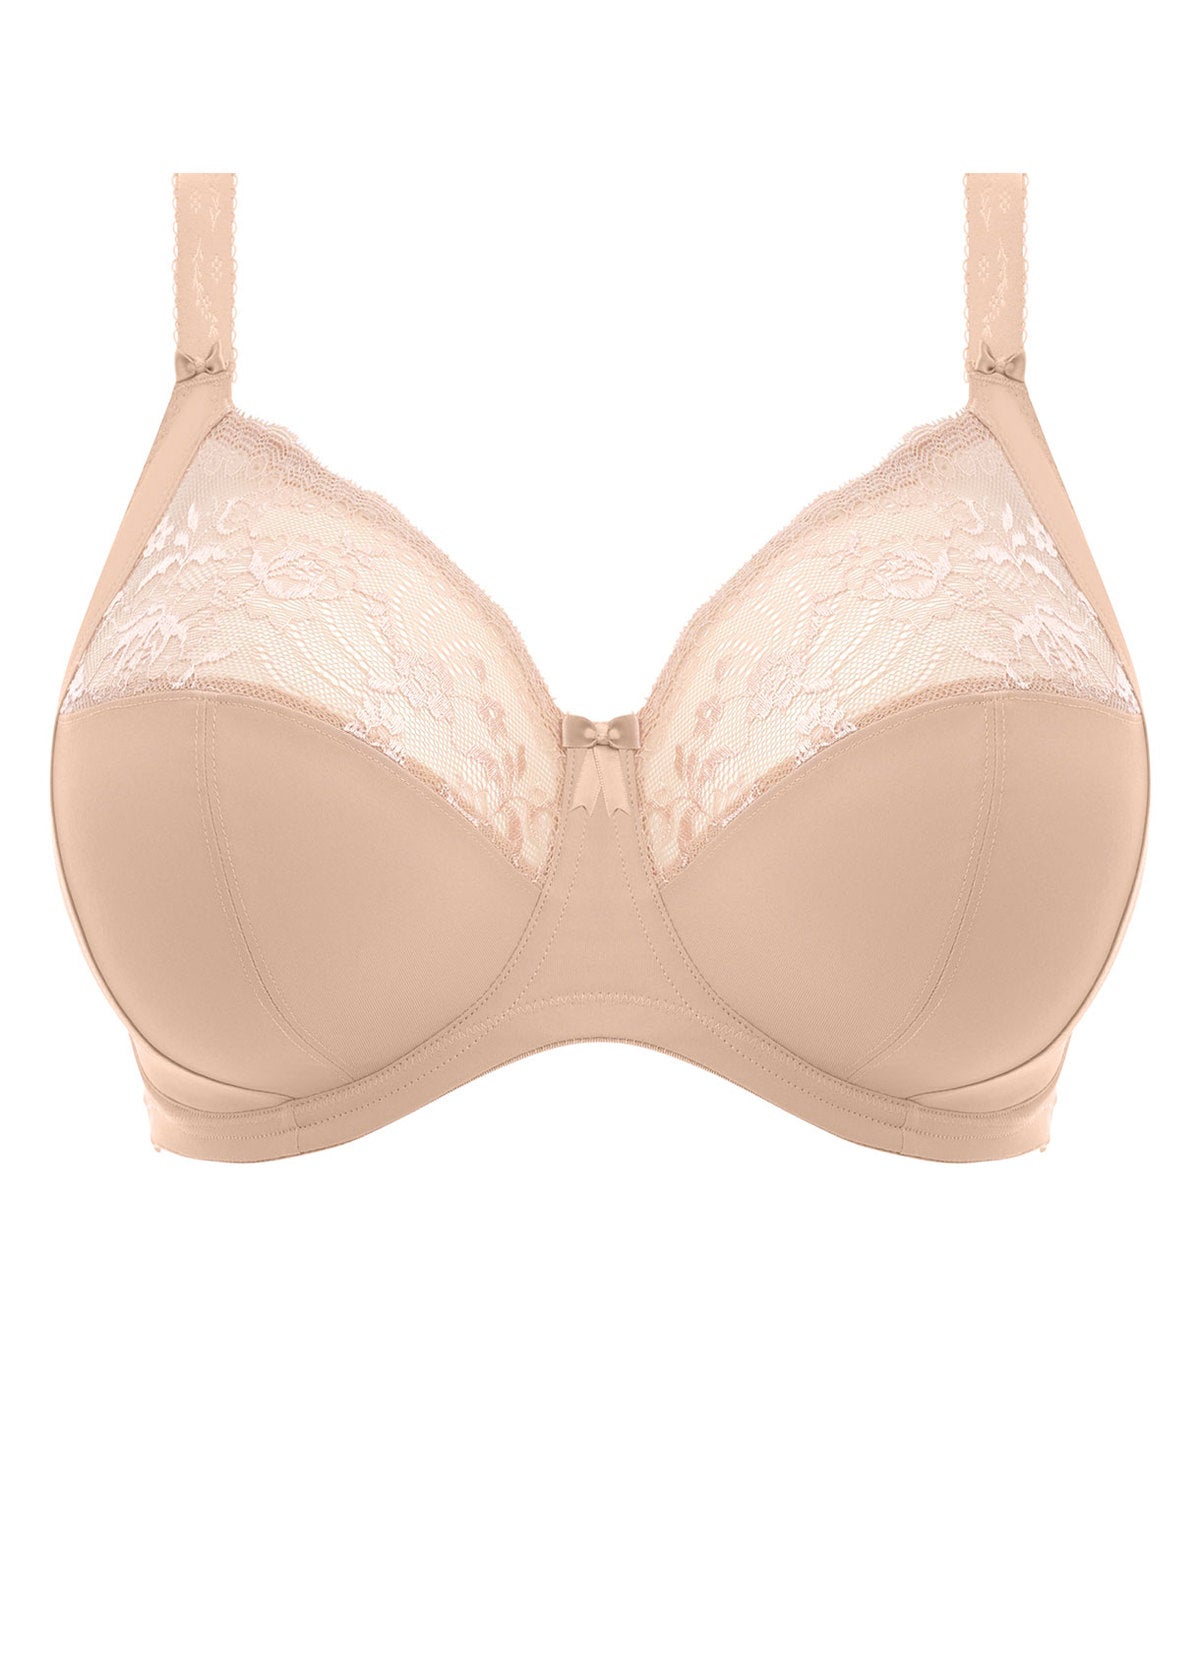 Pretty Things Elomi Morgan Full Cup Support Nude Bra - Underwear Specialists 